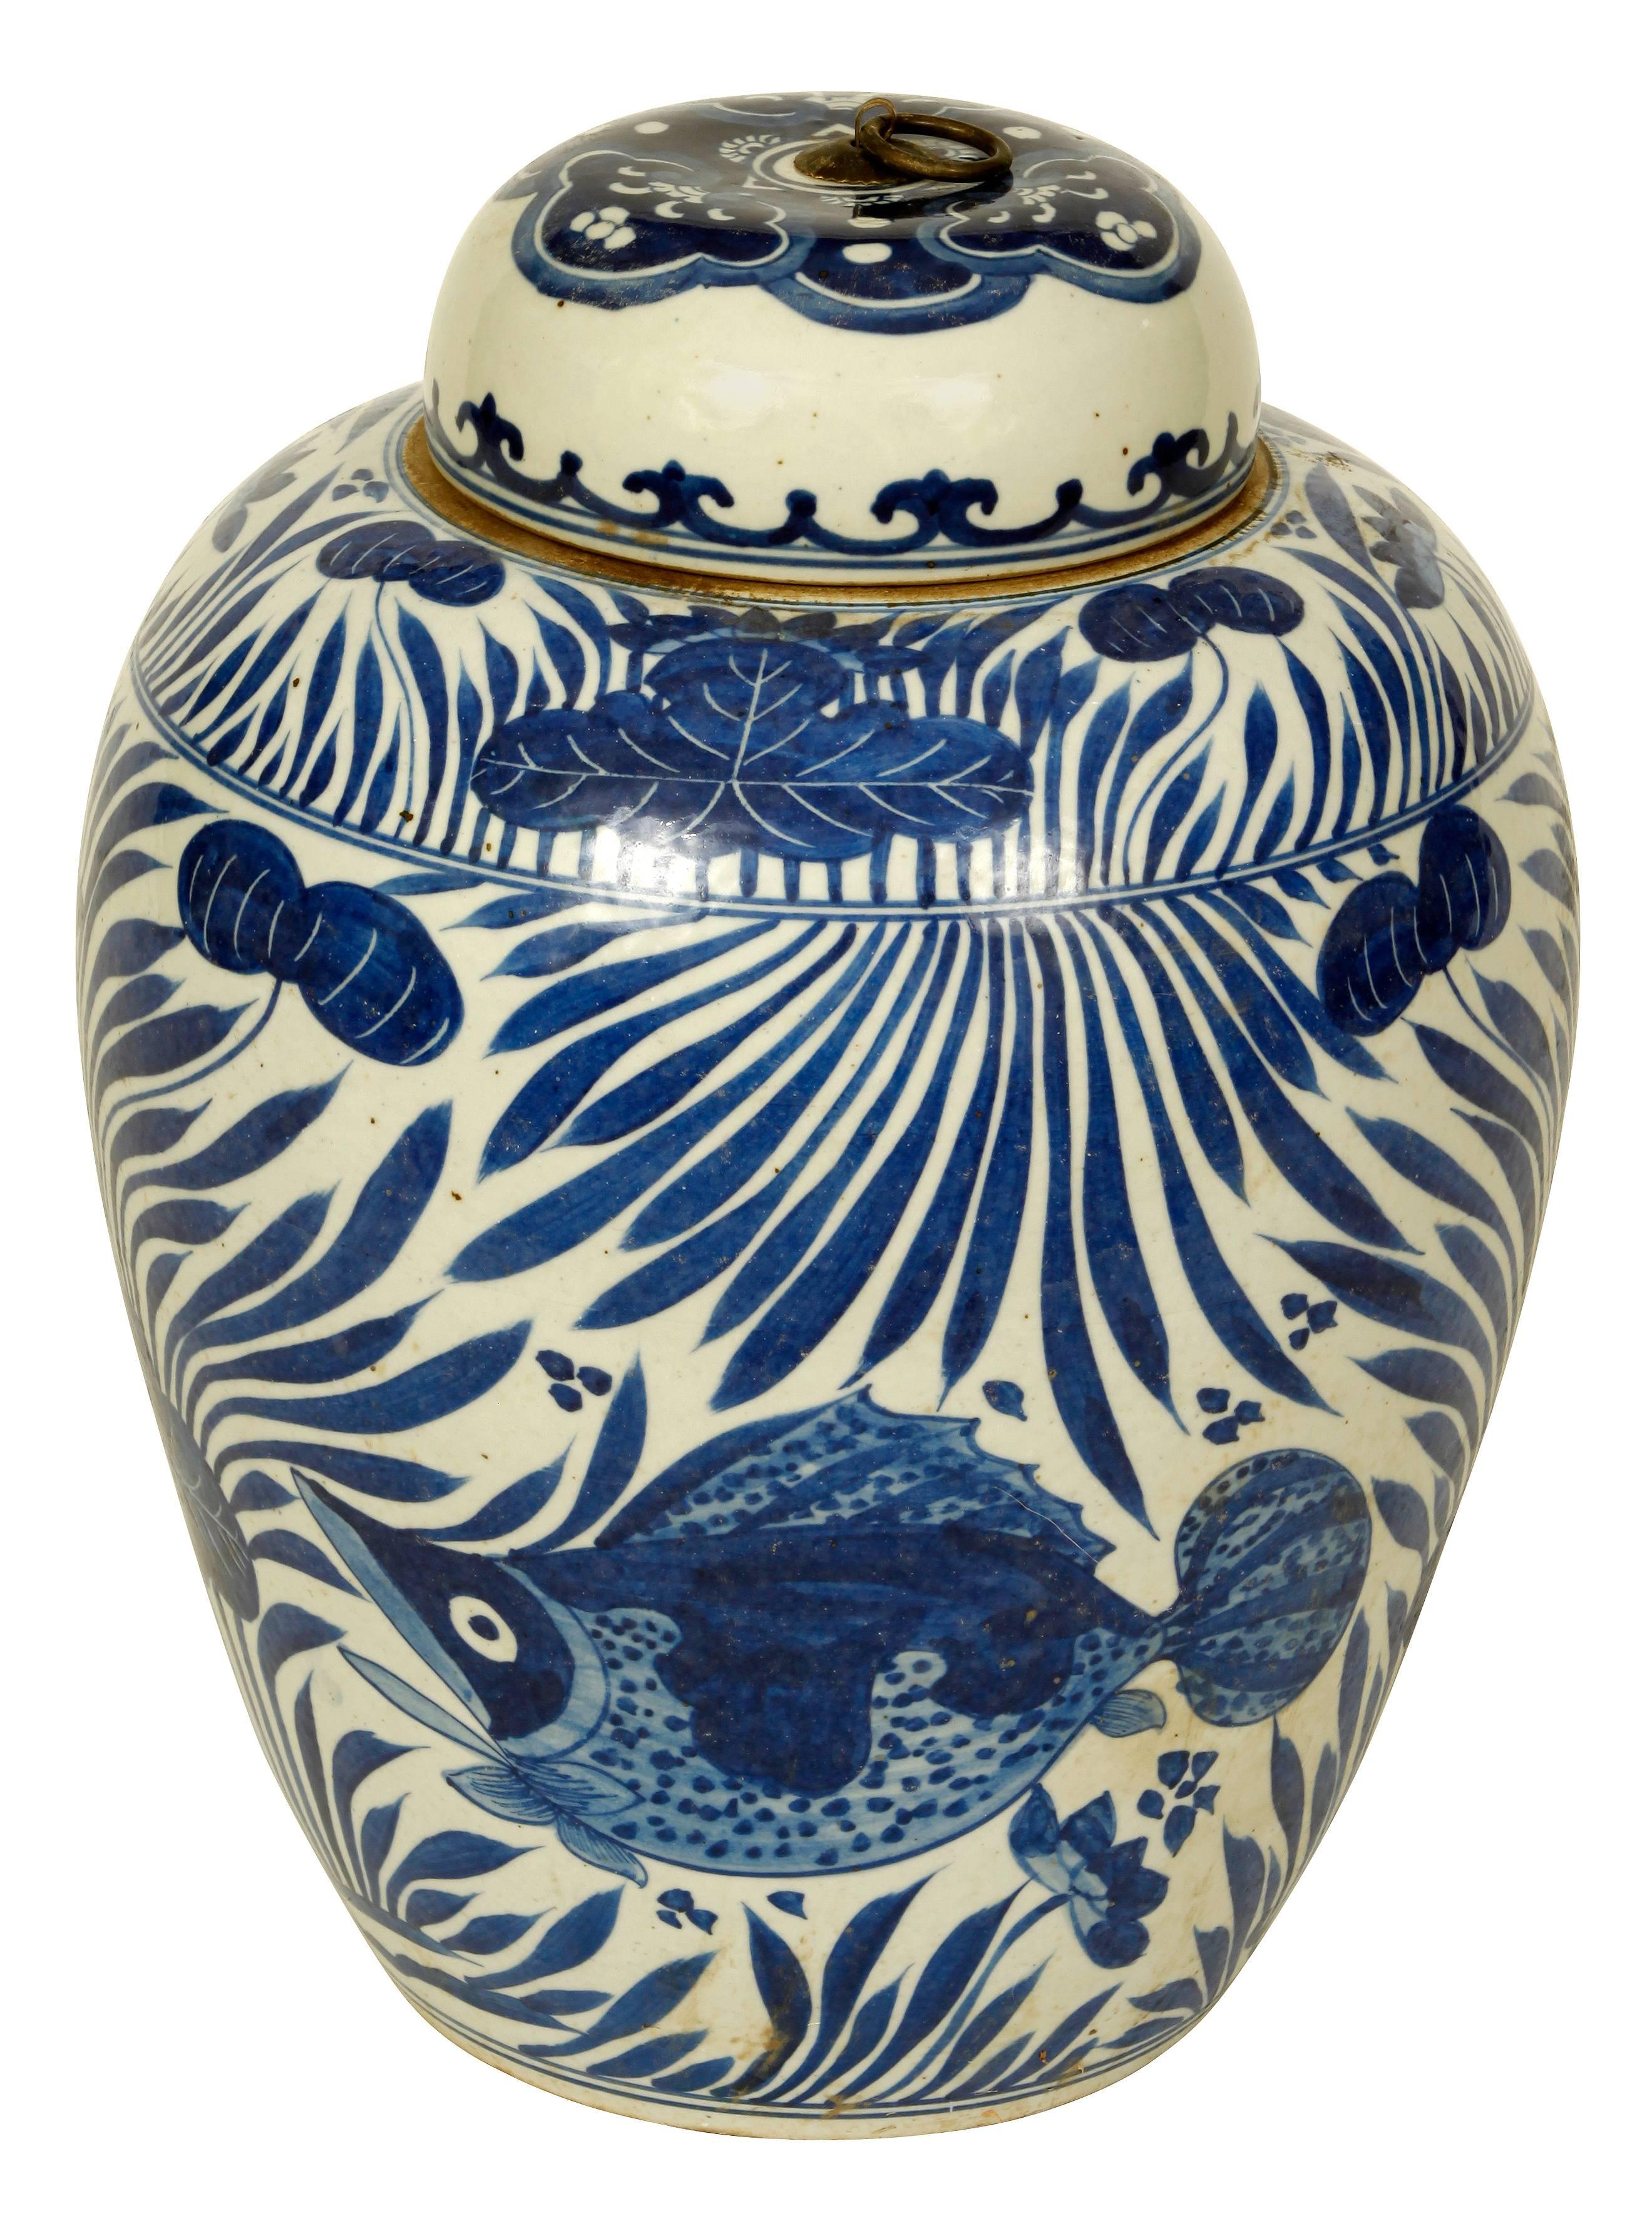 A pair of Chinese export ginger jars with blue and white lids with a stunning glaze.